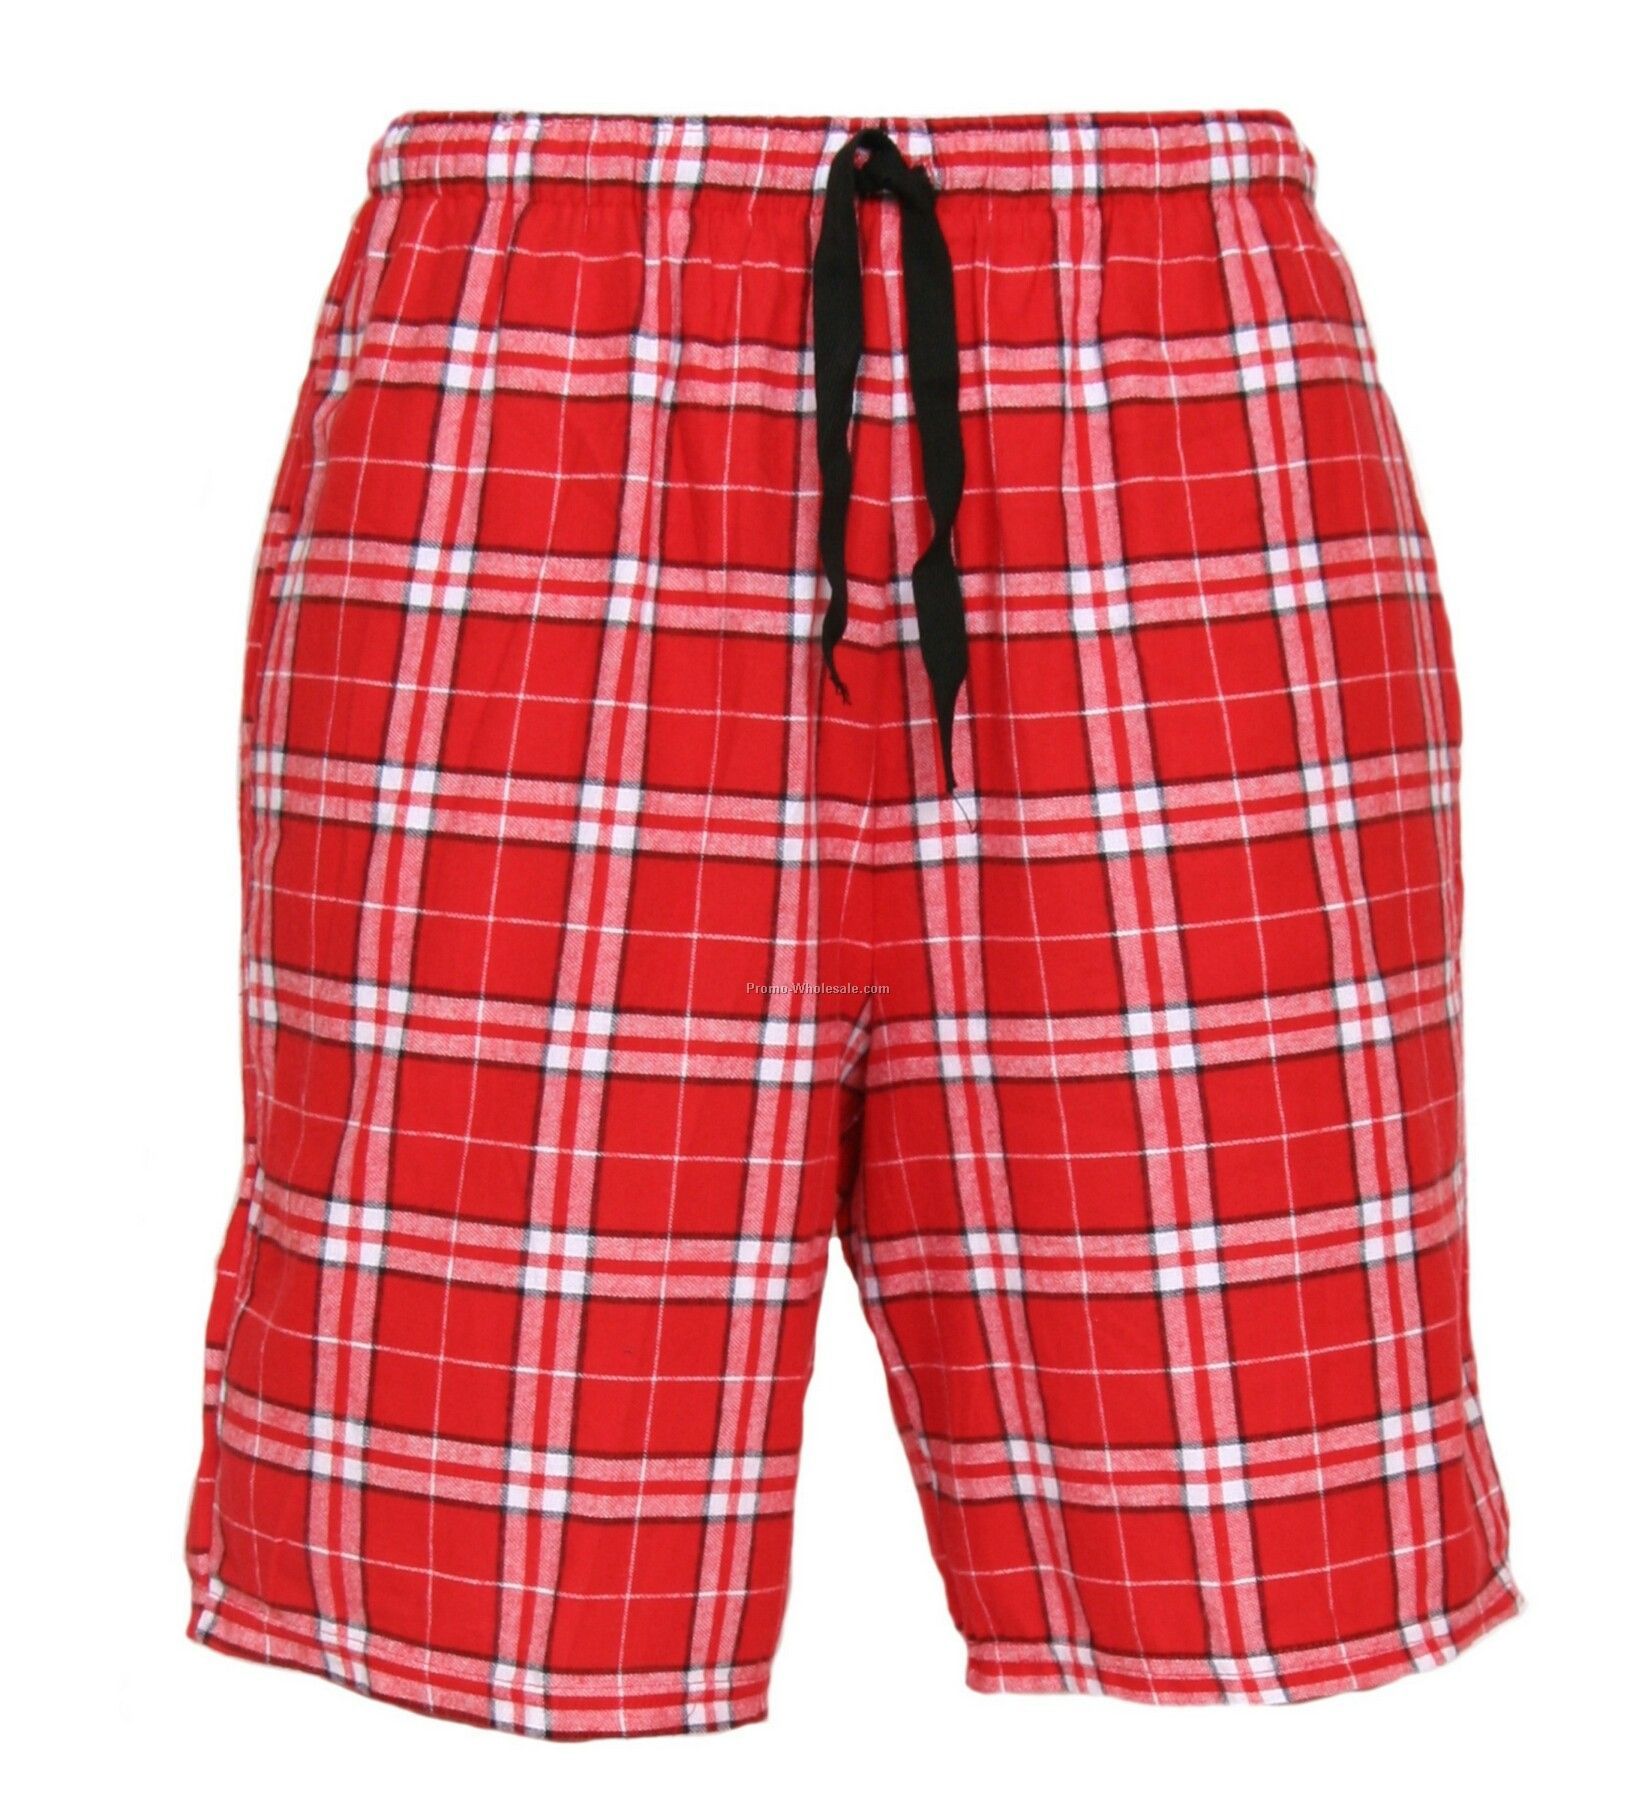 Youth' Red Flannel Dorm Shorts (Ys-yl)